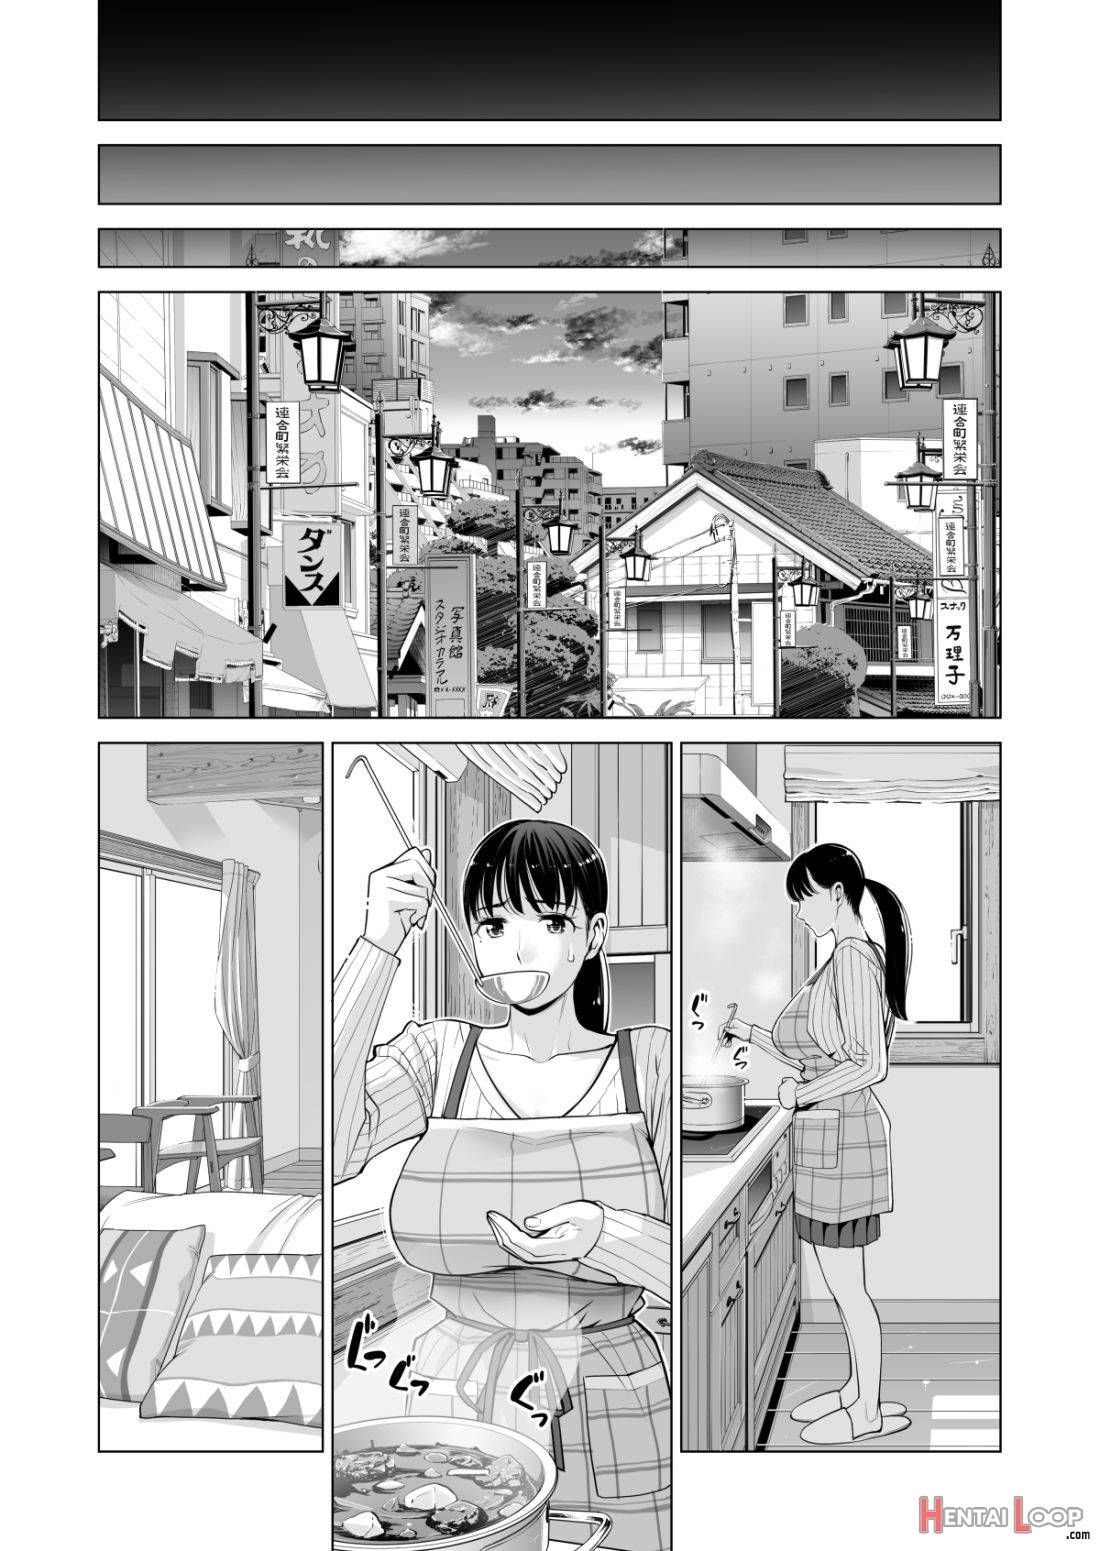 Tsukiyo no Midare Zake (Kouhen) Moonlit Intoxication ~ A Housewife Stolen by a Coworker Besides her Blackout Drunk Husband ~ Chapter 2 page 69